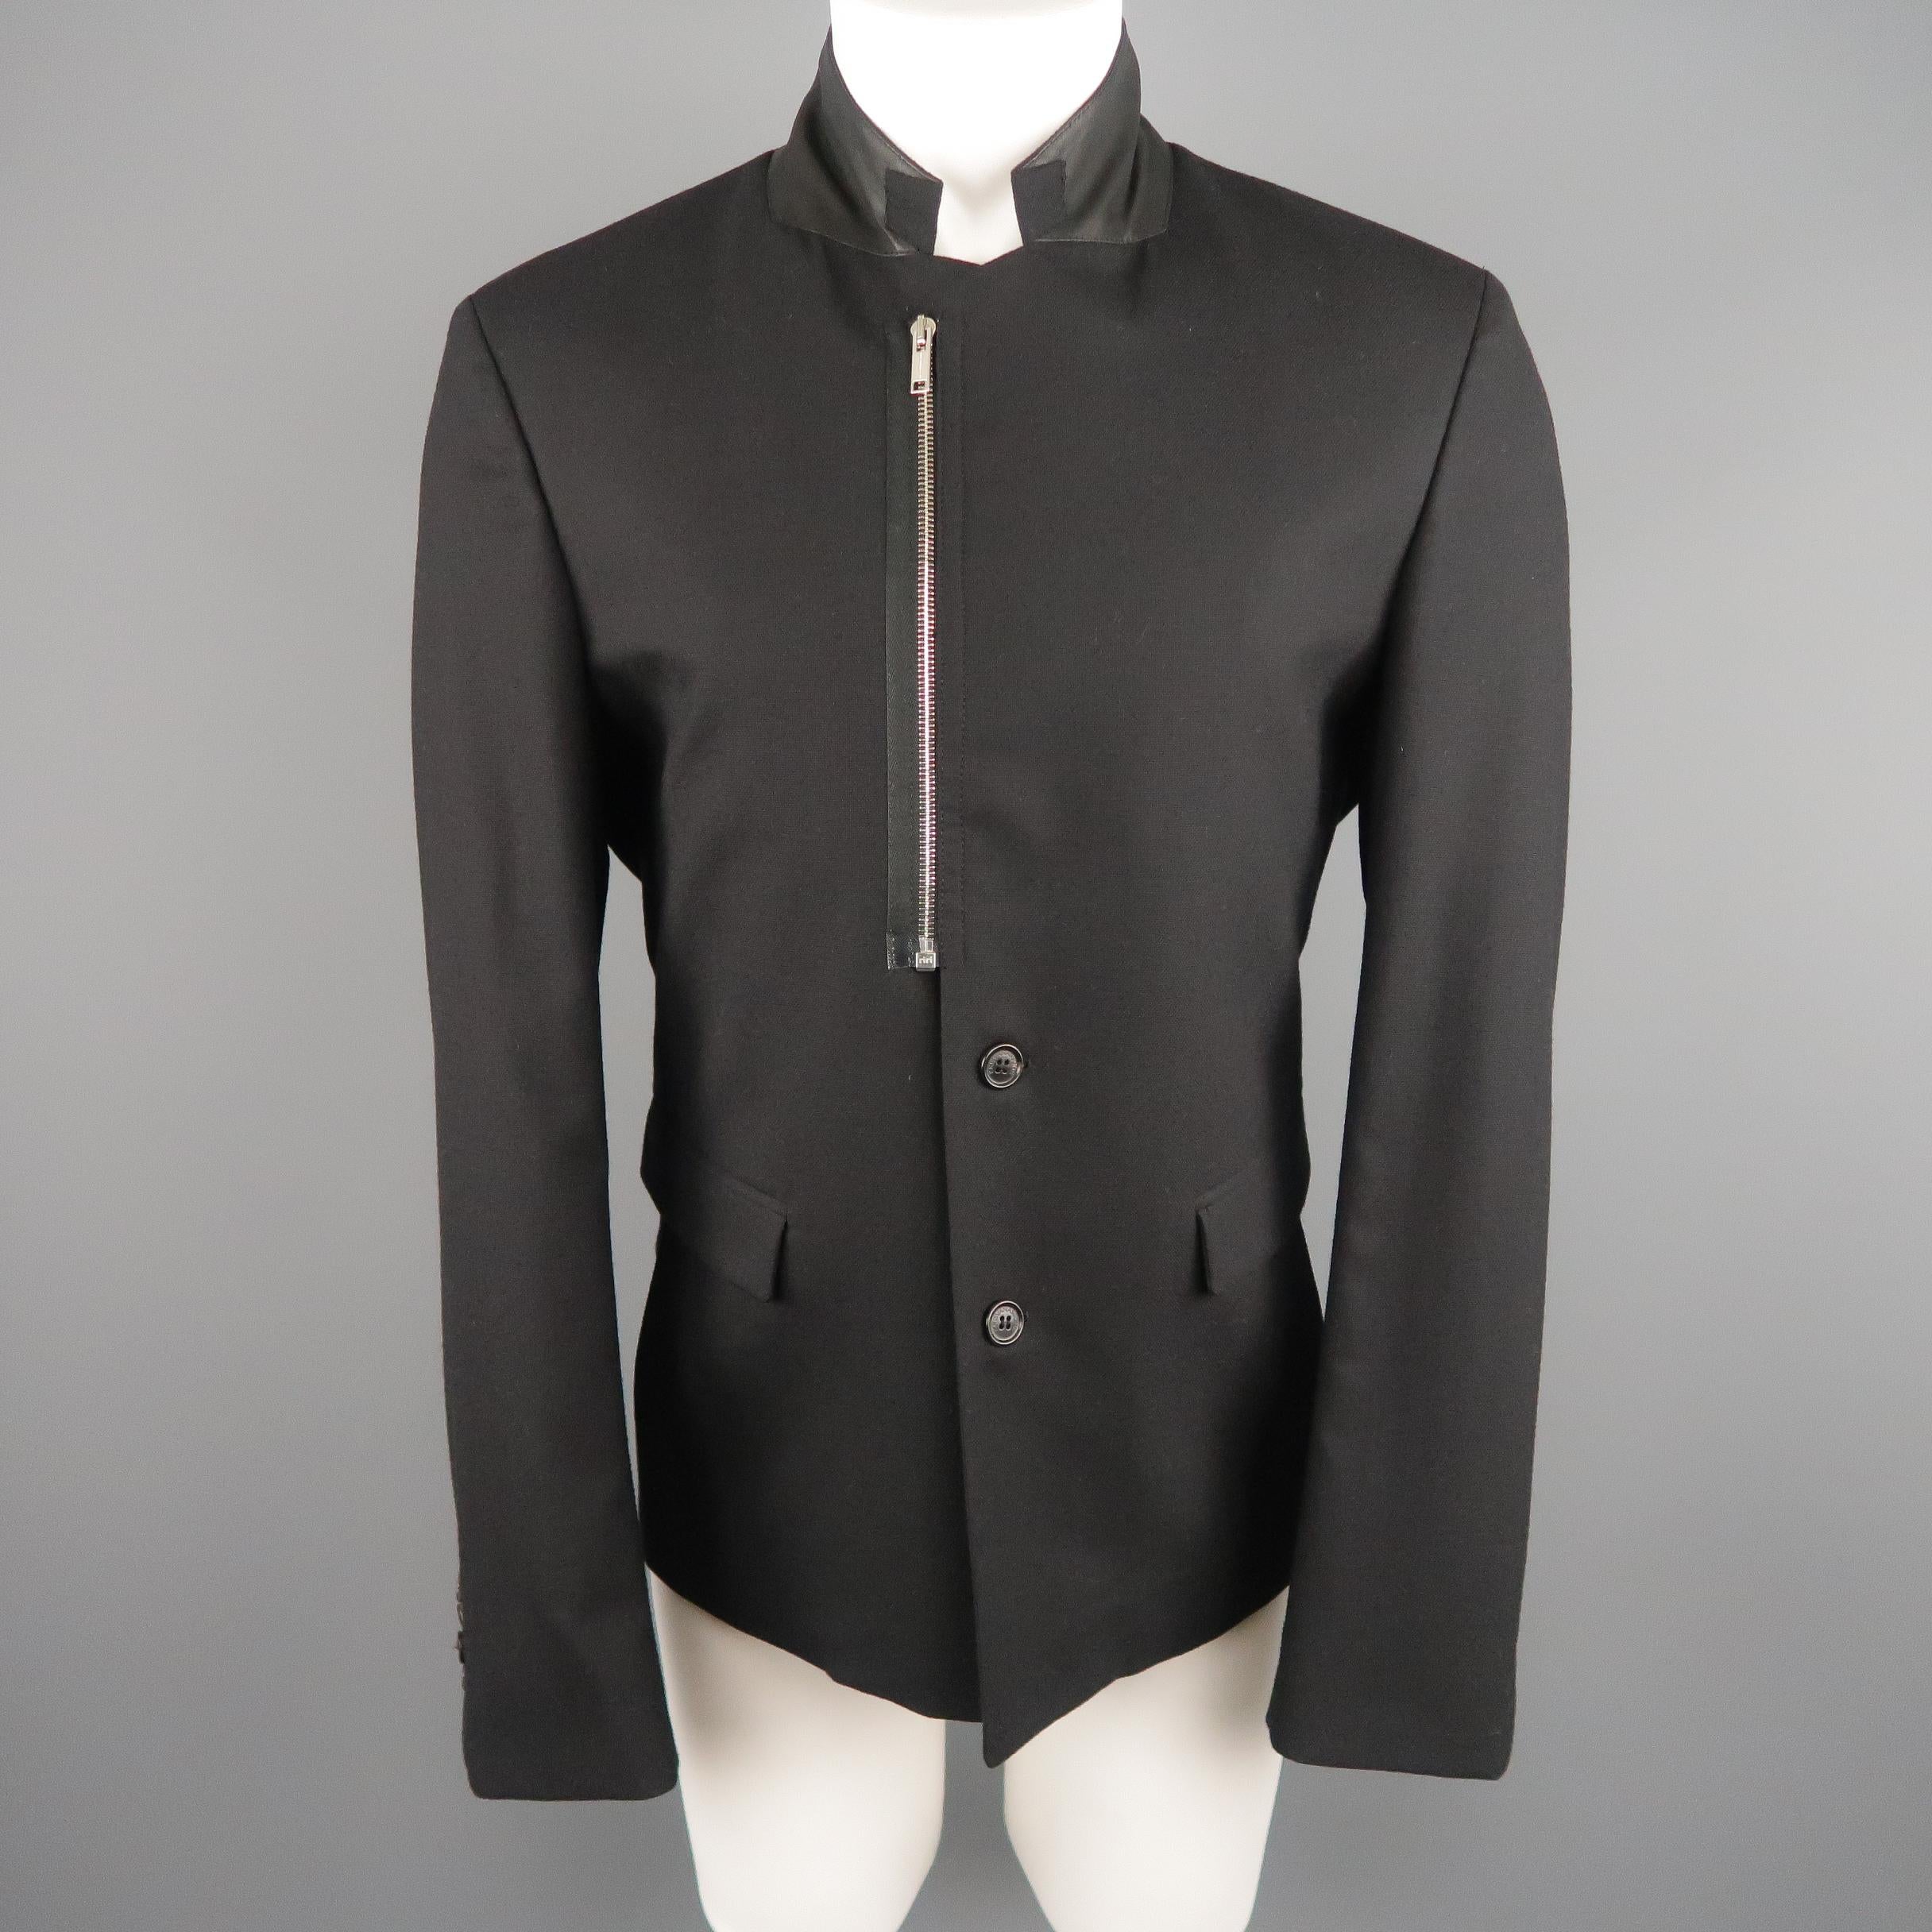 KRIS VAN ASSCHE  Sport Coat comes in a black tone in a solid wool blend material, with a leather lining at collar, notch lapel, flap pockets, zip and 2 buttons at closure, single breasted, and with a buttoned cuff. Made in Italy.
 
Excellent